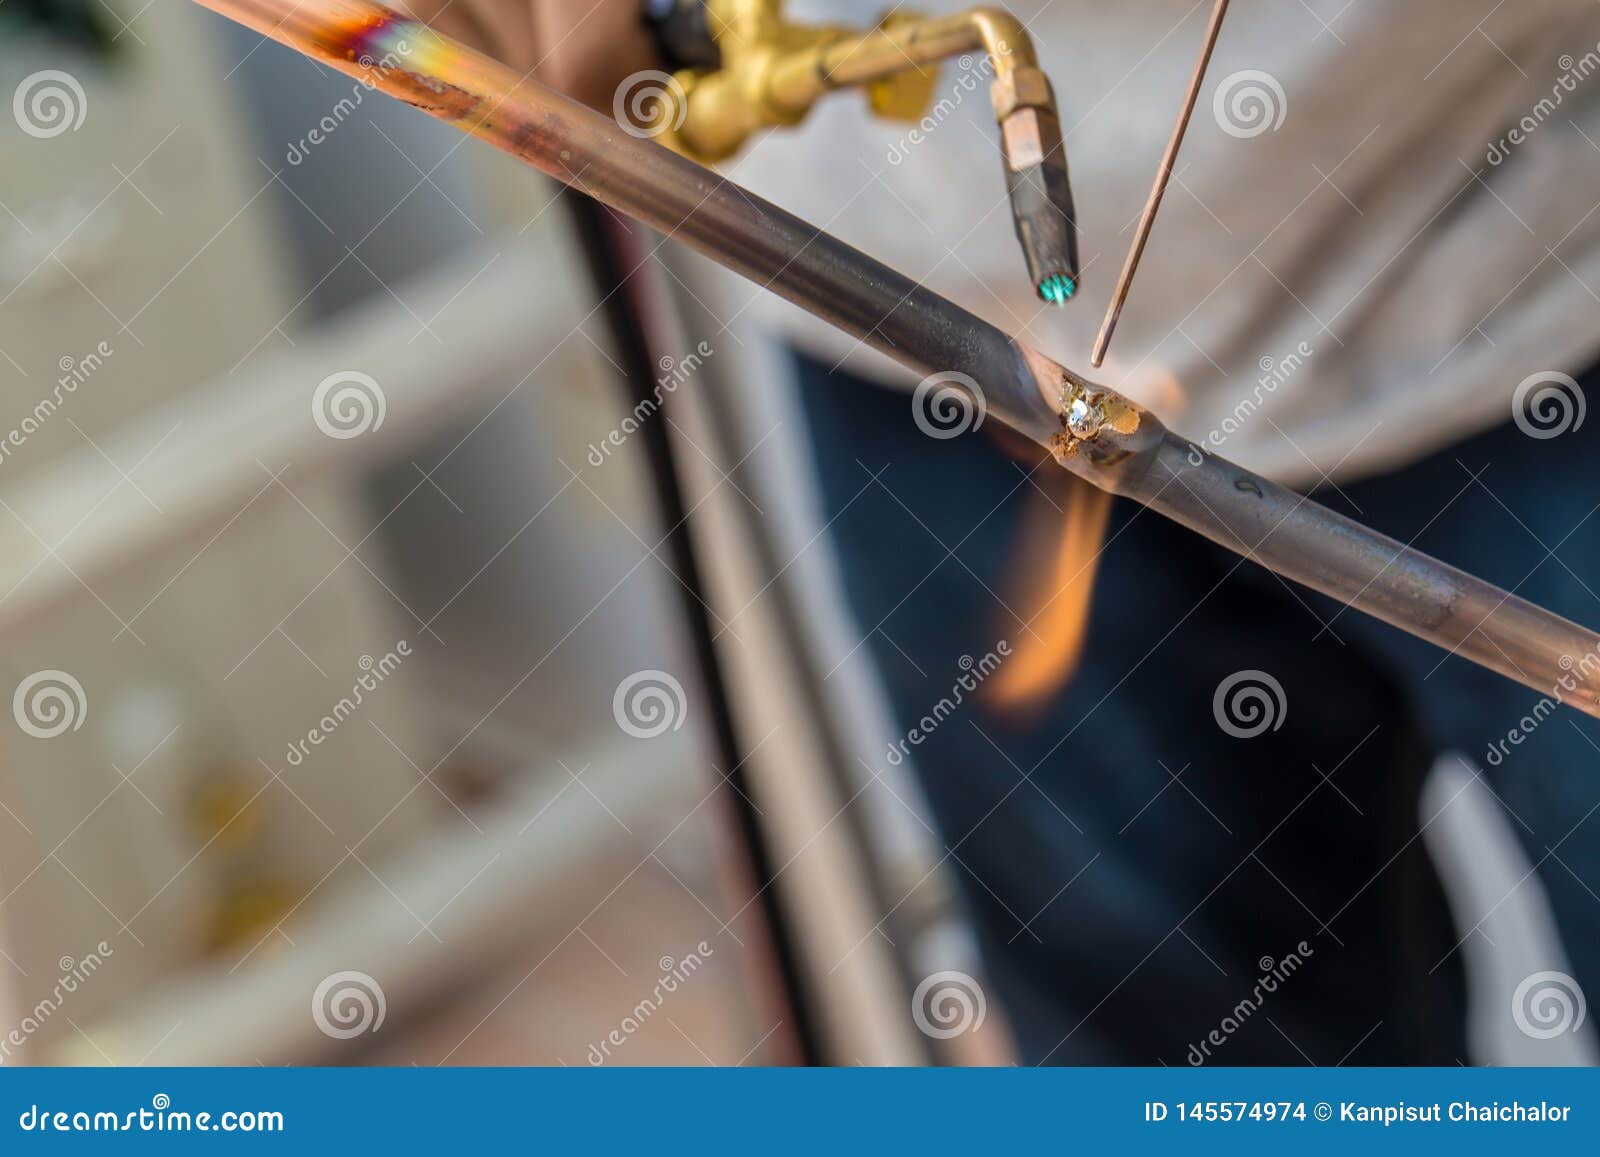 Welding Of Copper Pipe Of A Methane Gas Pipeline Or Of A Conditioning Or Water System Welding Soldering Copper Pipes Stock Photo Image Of House Dangerous 145574974